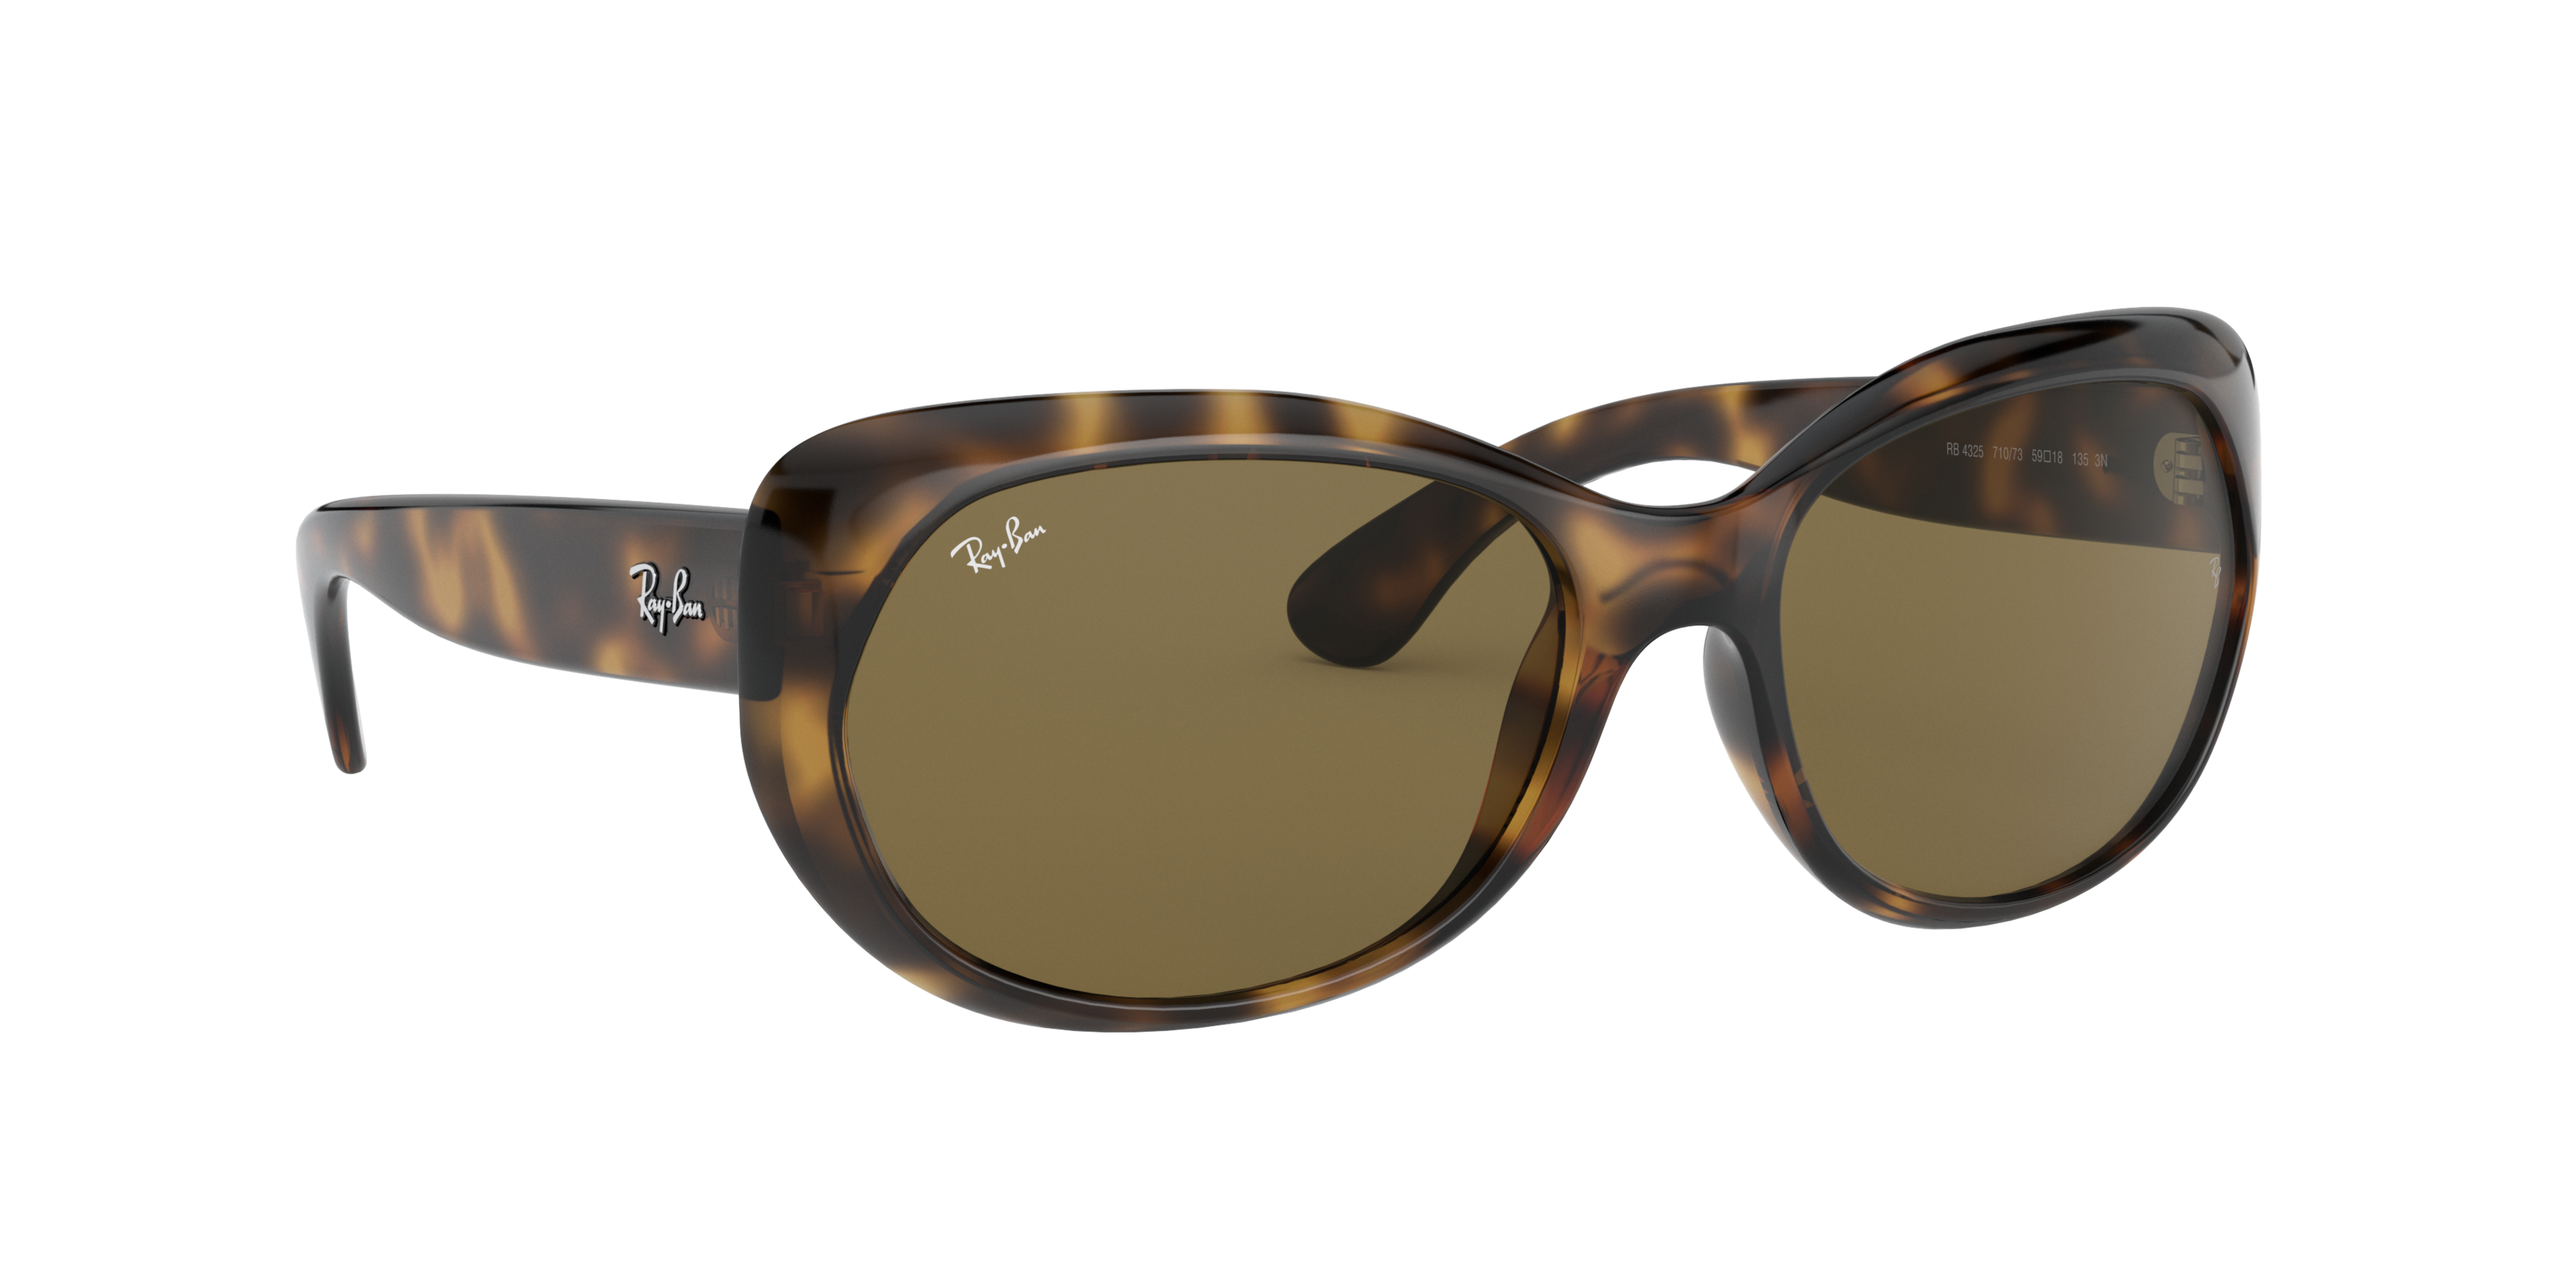 Angle_Right01 Ray-Ban RB 4325 (710/73) Sunglasses Brown / Tortoise Shell